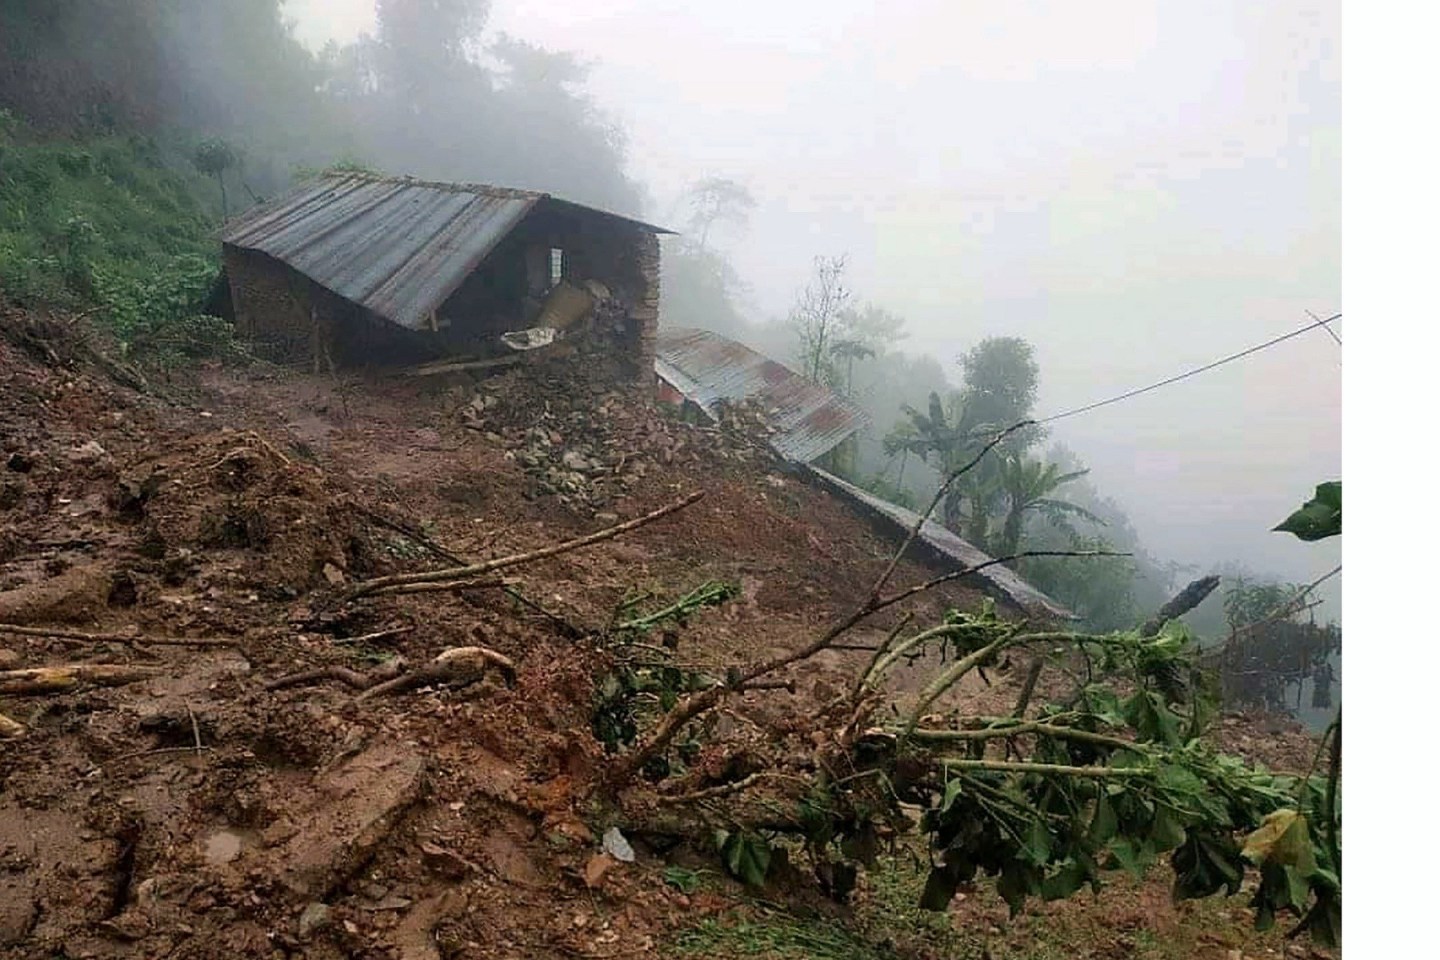 Child development center and house buried by landslide